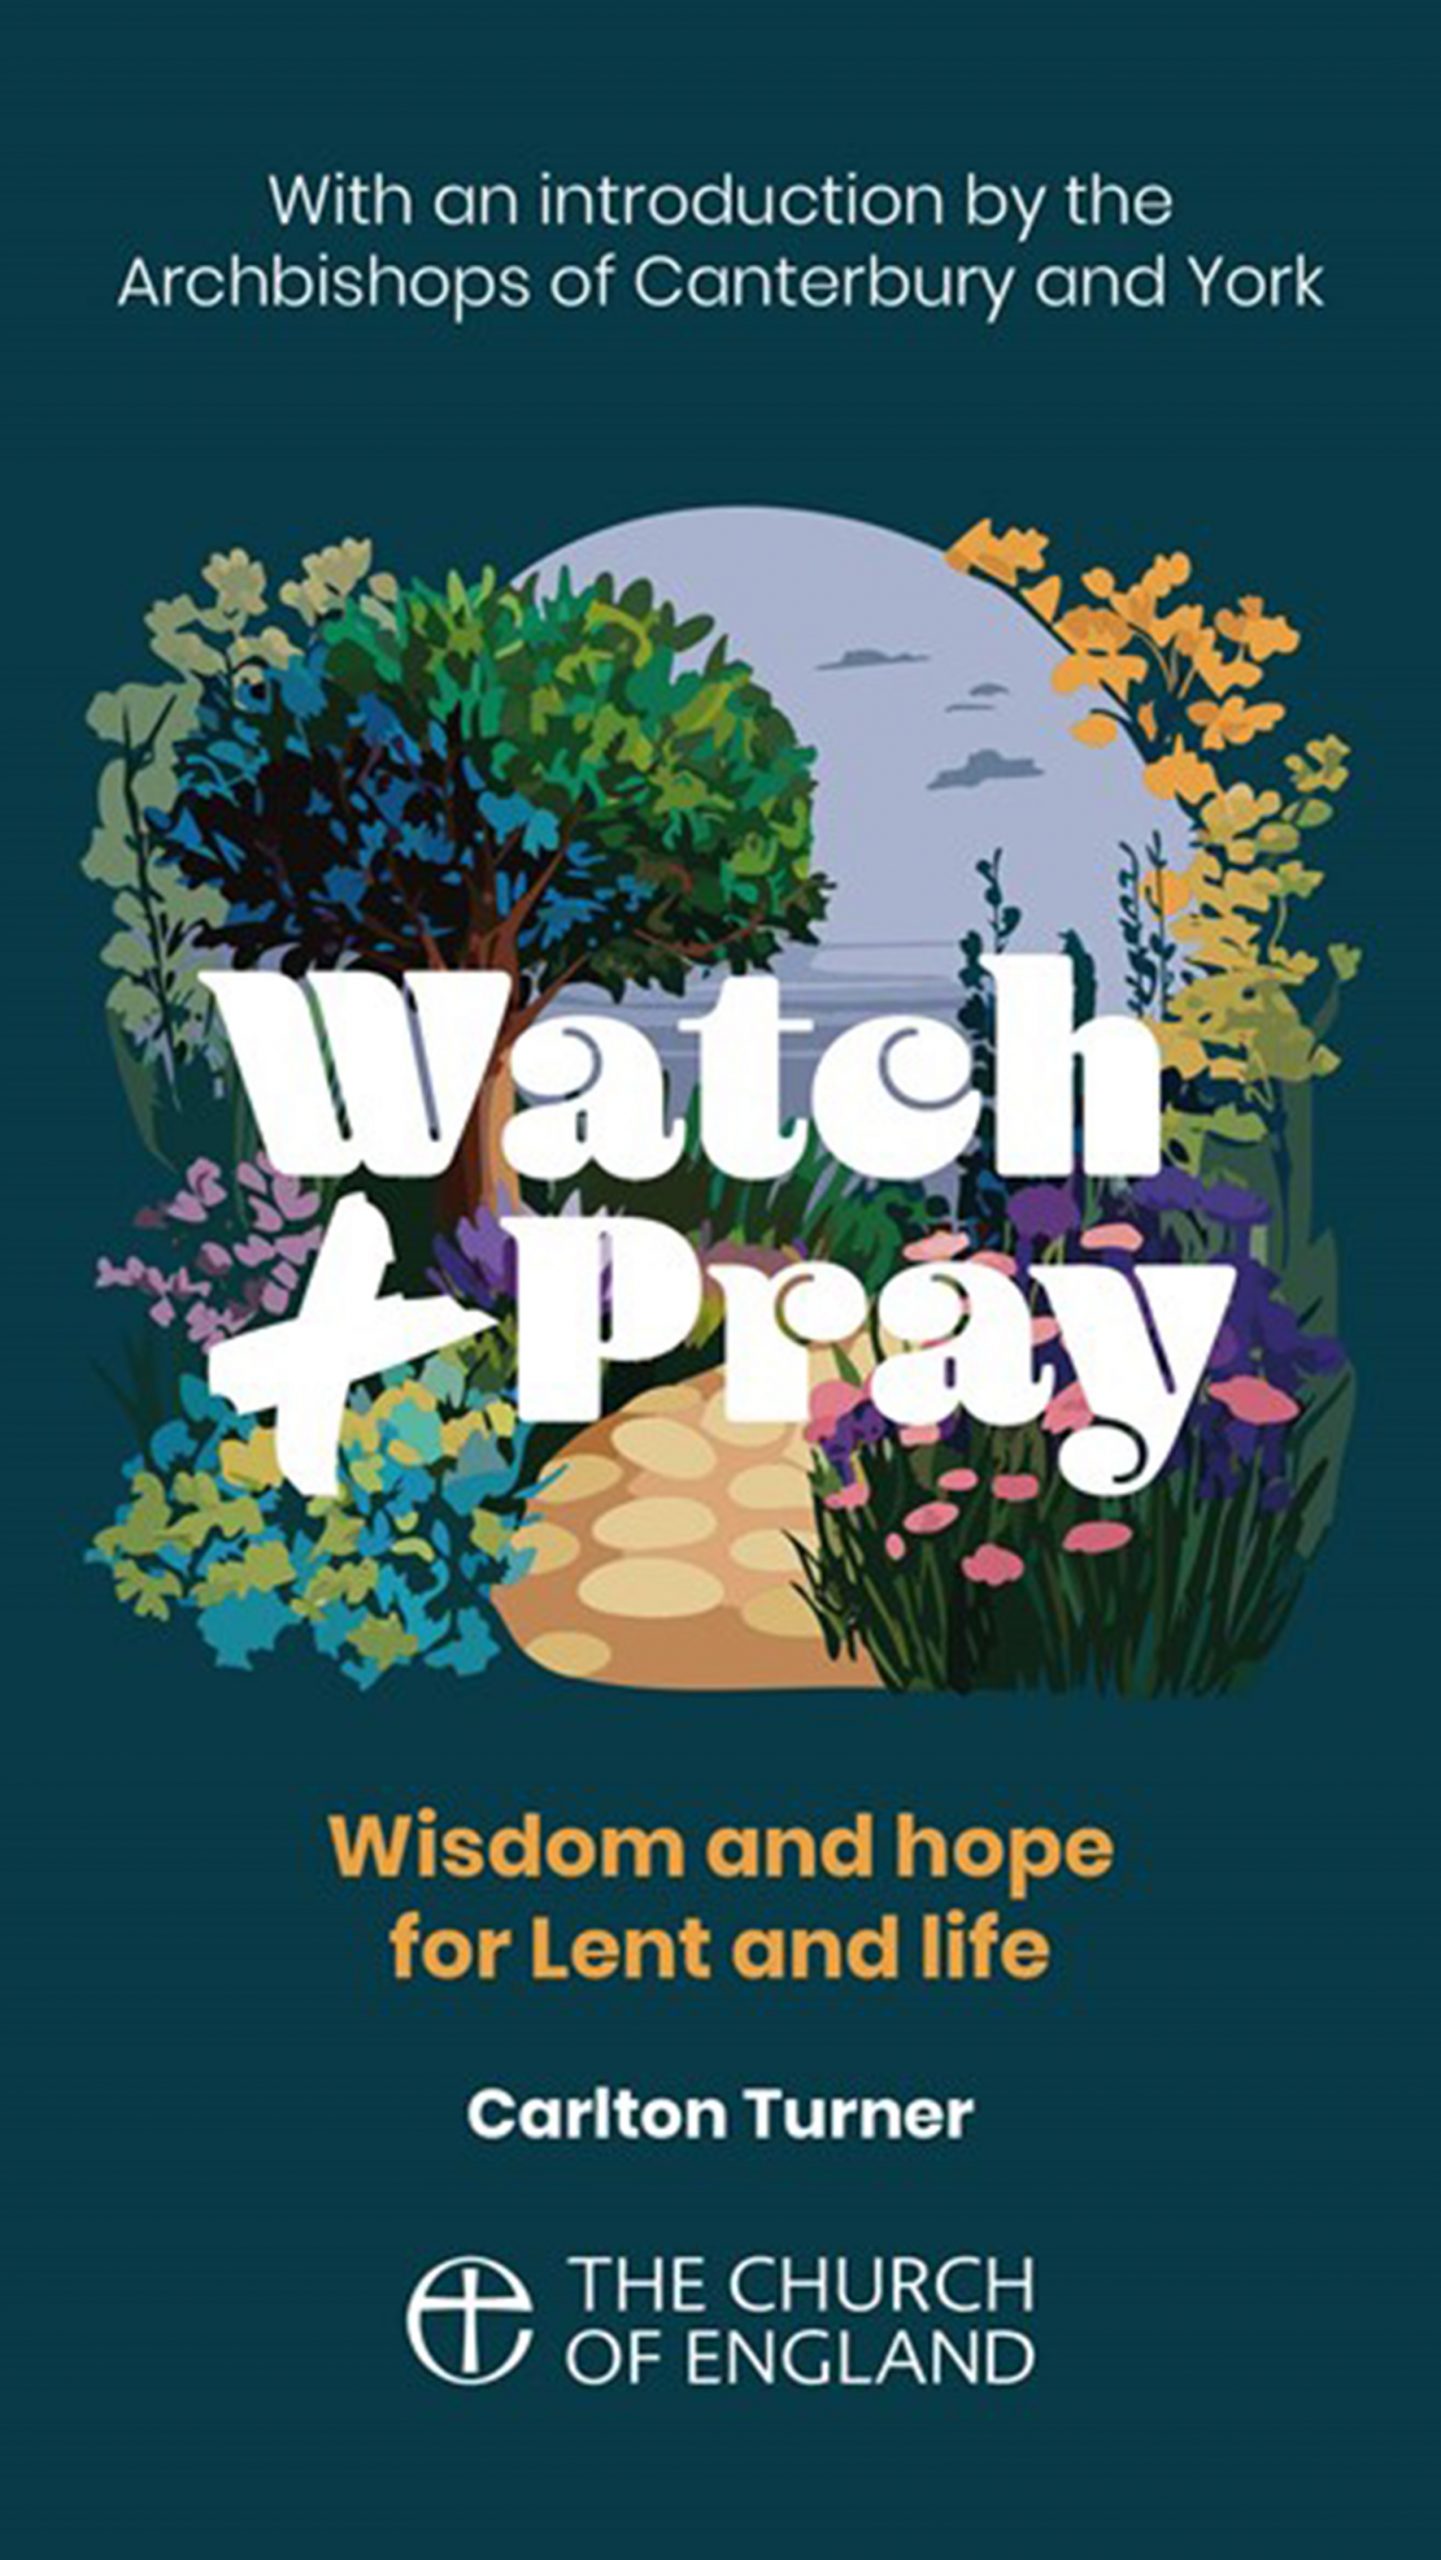 Watch + Pray: Wisdom and Hope for Lent and Life